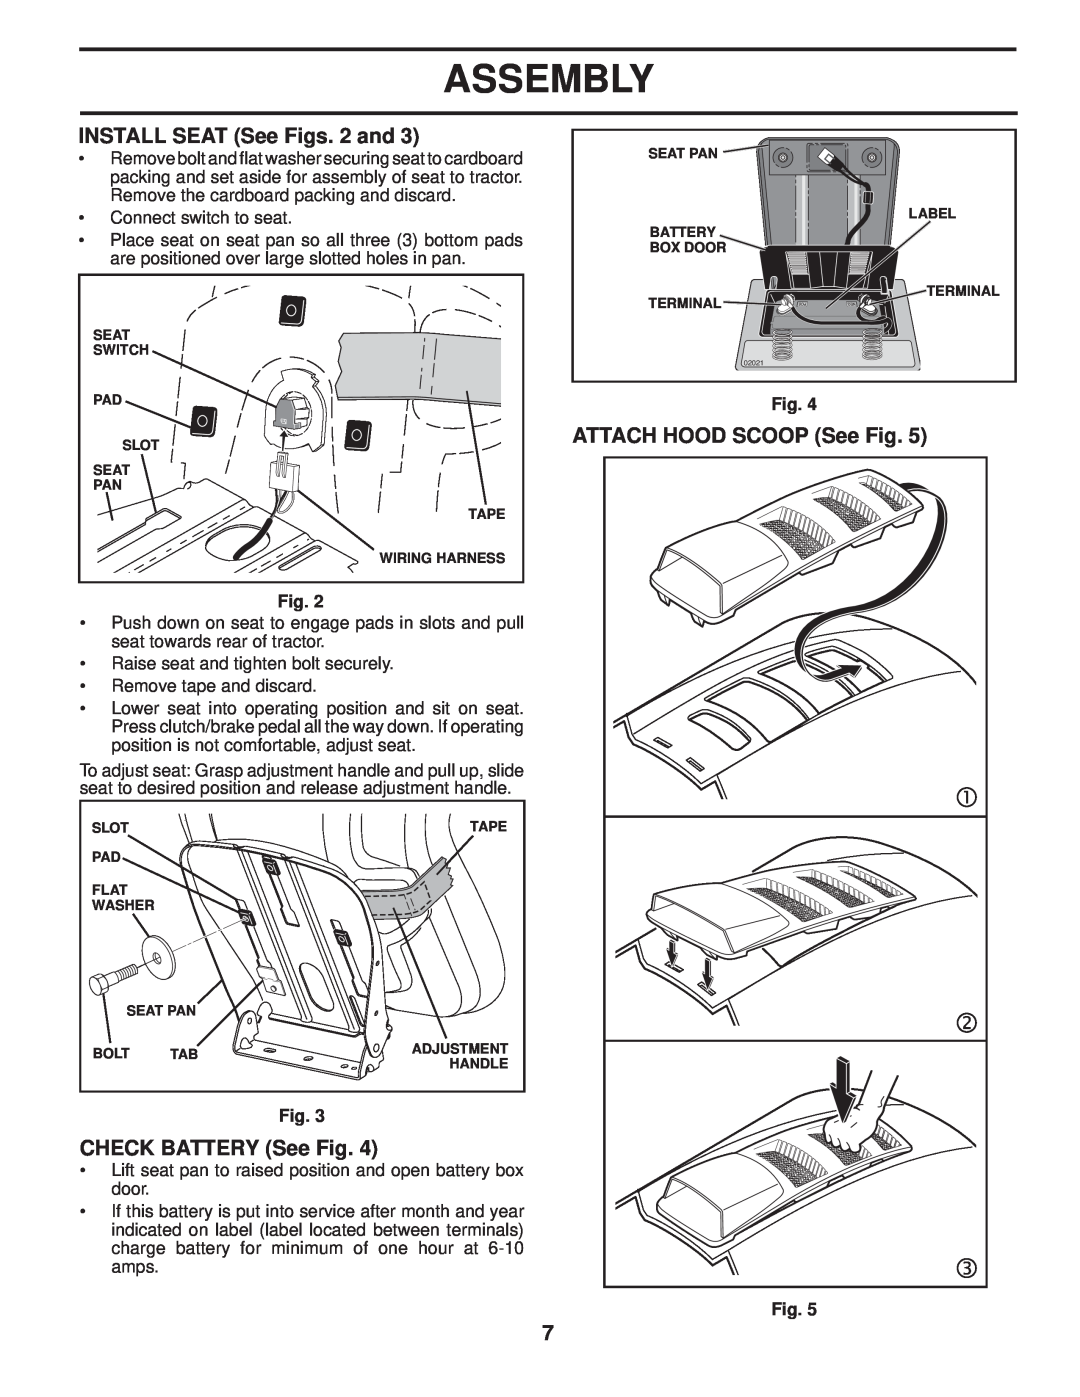 Husqvarna LTH1742T manual INSTALL SEAT See Figs. 2 and, CHECK BATTERY See Fig, ATTACH HOOD SCOOP See Fig, Assembly 